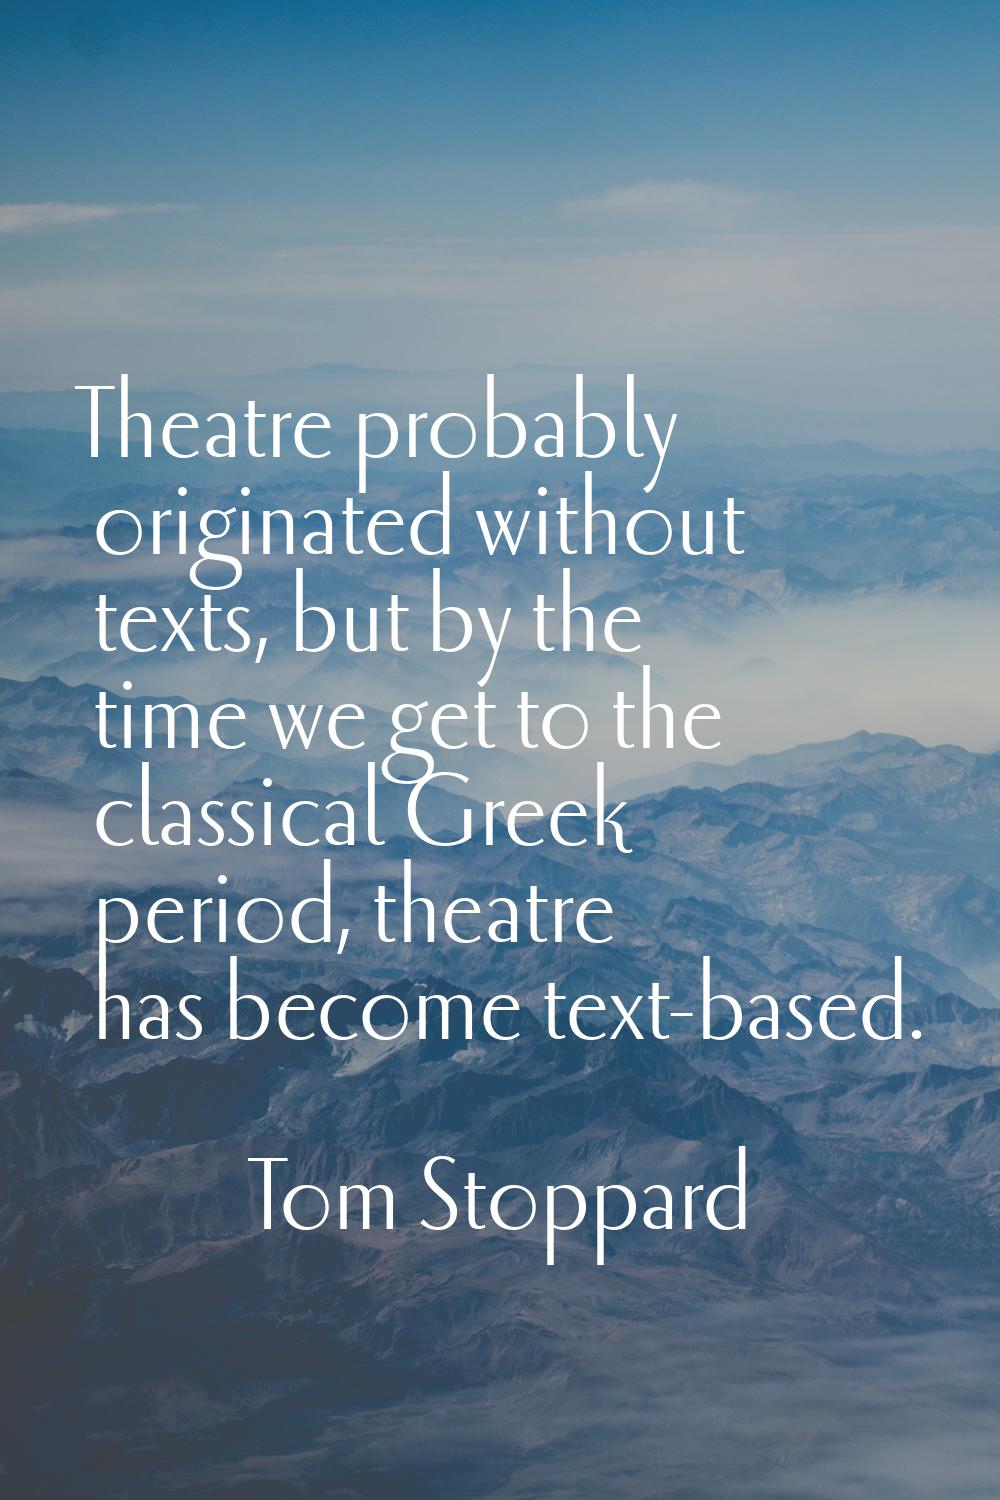 Theatre probably originated without texts, but by the time we get to the classical Greek period, th